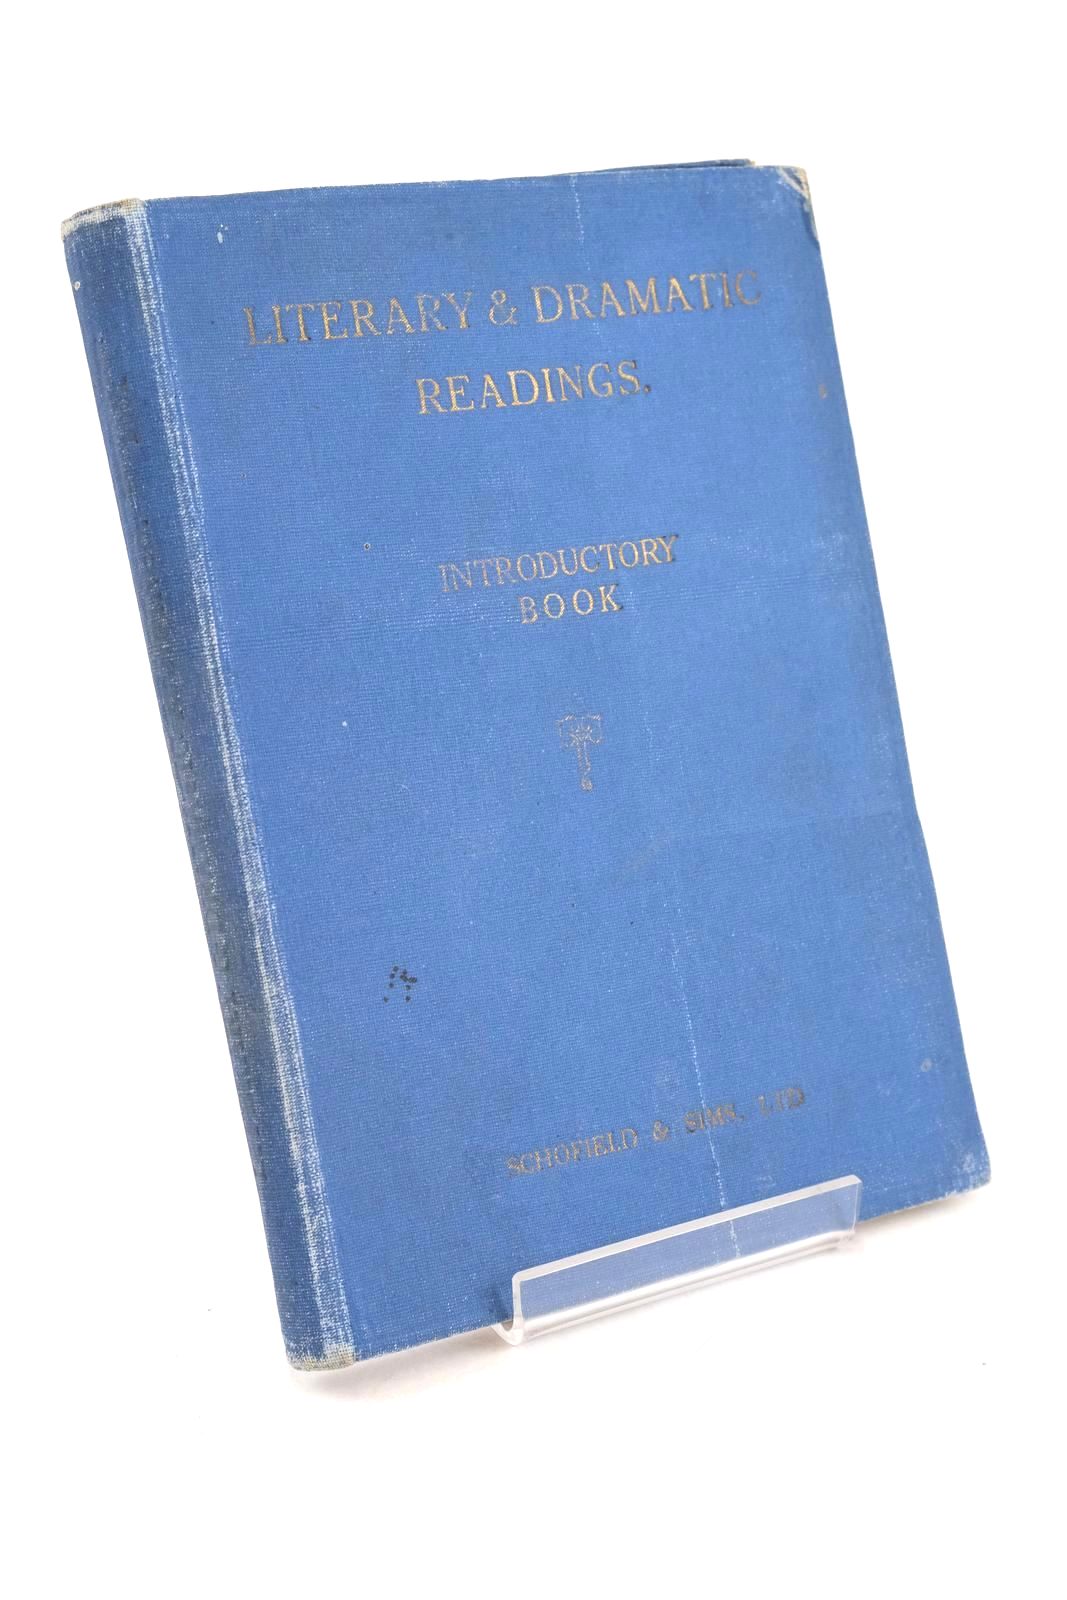 Photo of LITERARY AND DRAMATIC READINGS: INTRODUCTORY BOOK written by Partington, M. Spink, H.M. illustrated by Bestall, Alfred Dixon, George S. published by Schofield &amp; Sims Ltd. (STOCK CODE: 1327677)  for sale by Stella & Rose's Books